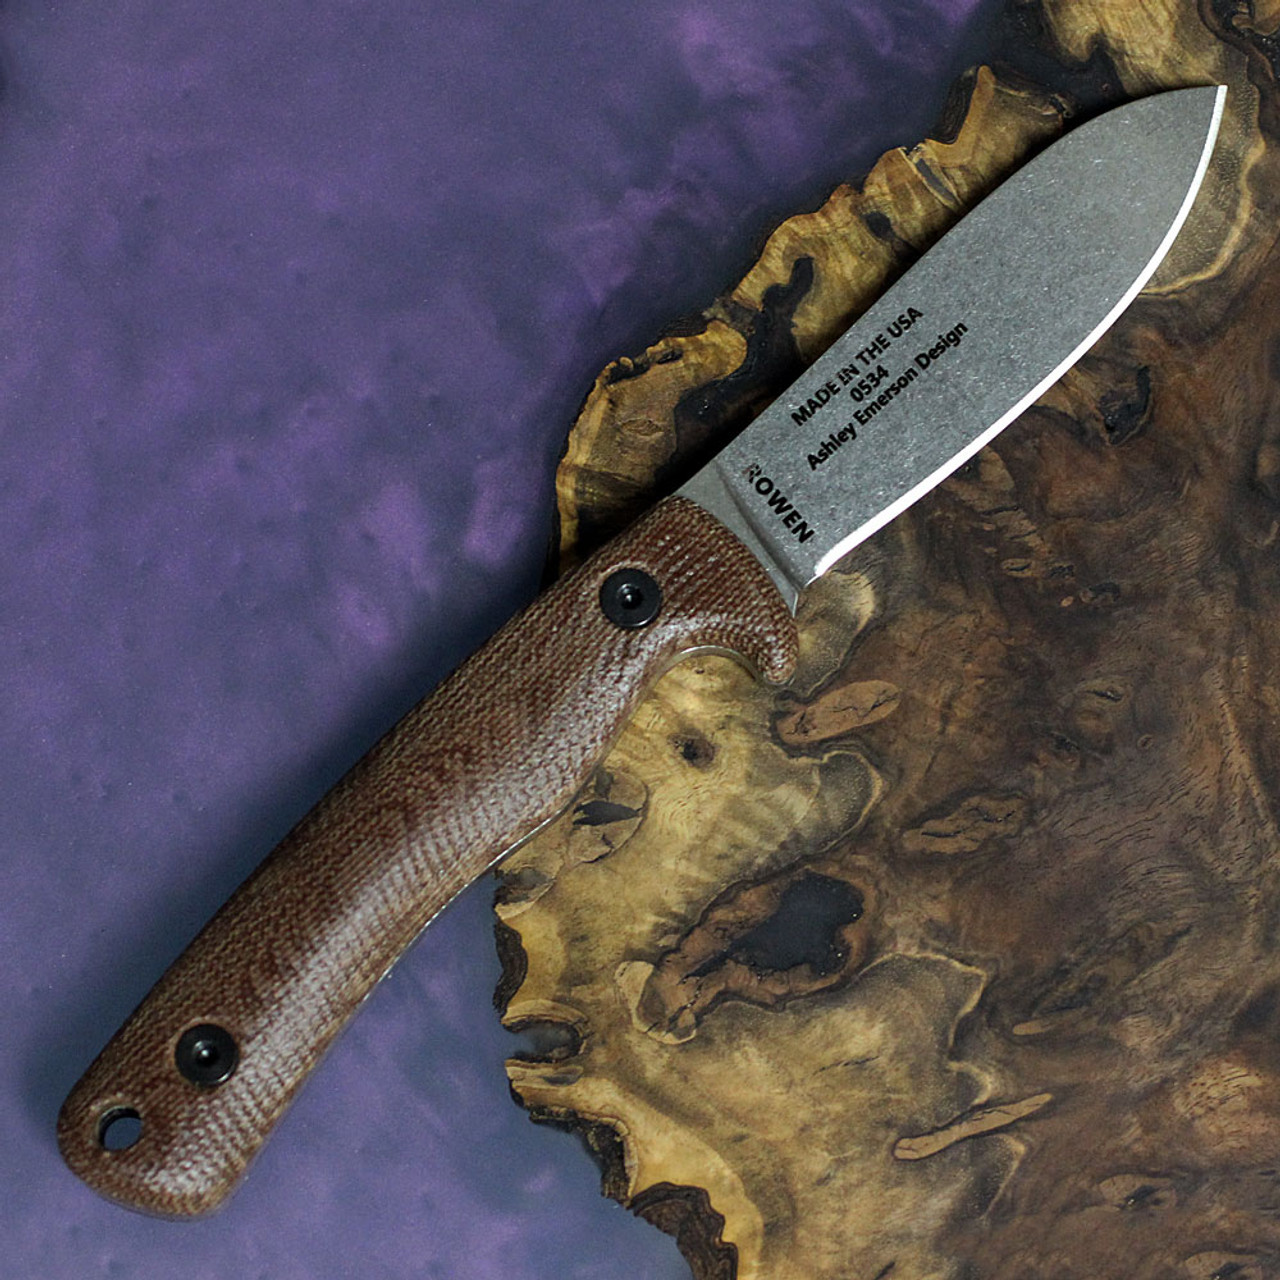 ESEE-Ashley Game Knife (ESEE-AGK-35V)- 3.55" Stonewashed CPM-S35VN Drop Point Blade, Brown Micarta Handle